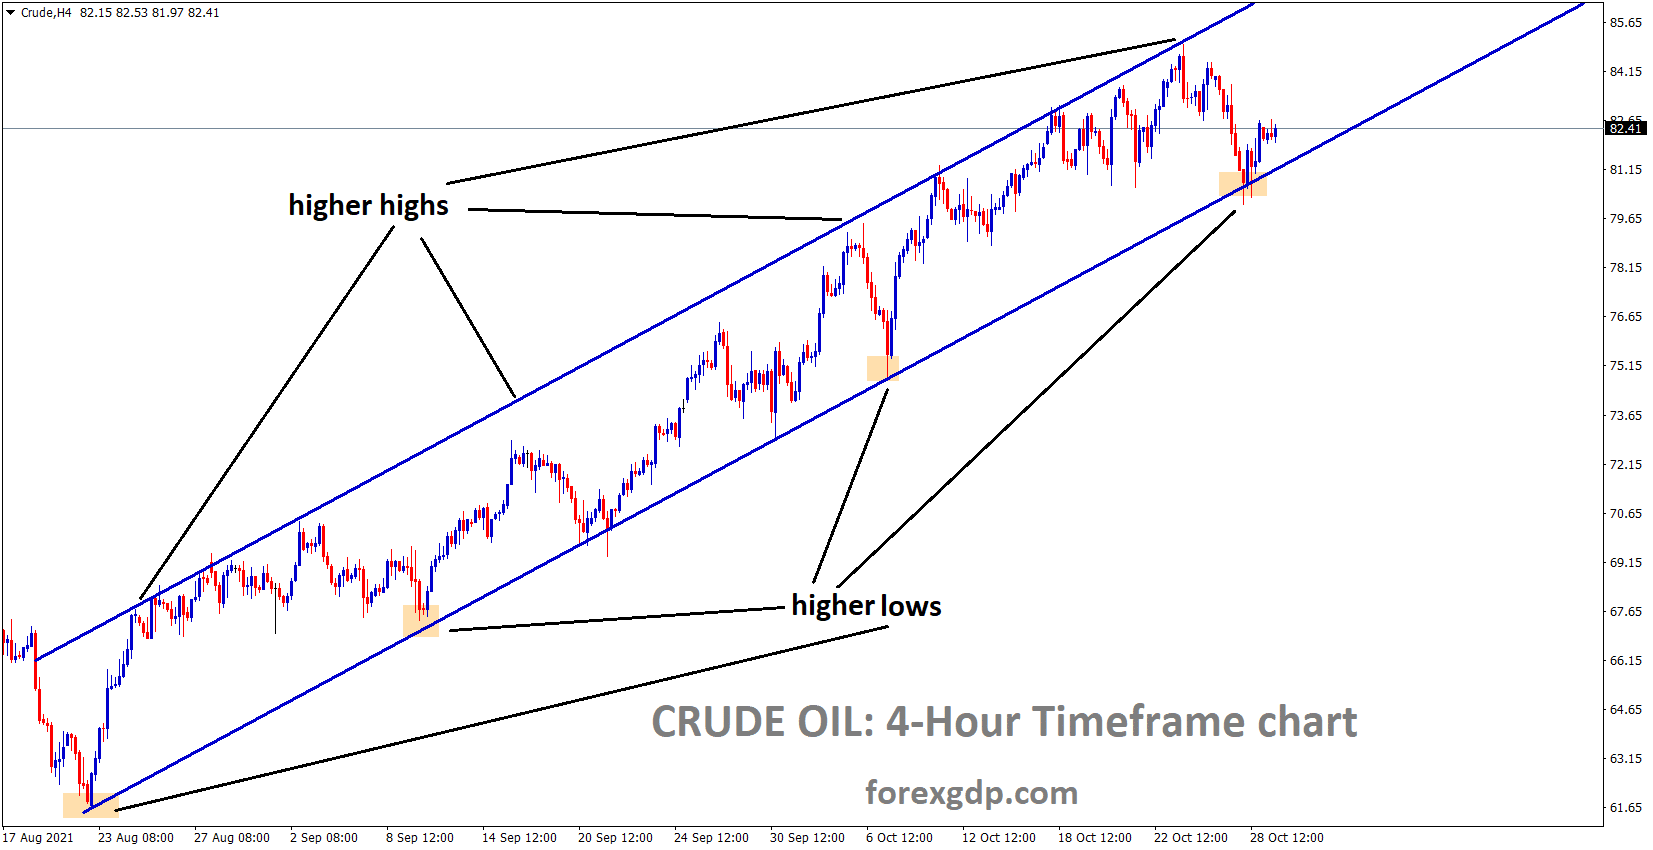 Crudeoil is moving in an Ascending channel and the Market has rebounded from a Higher low area